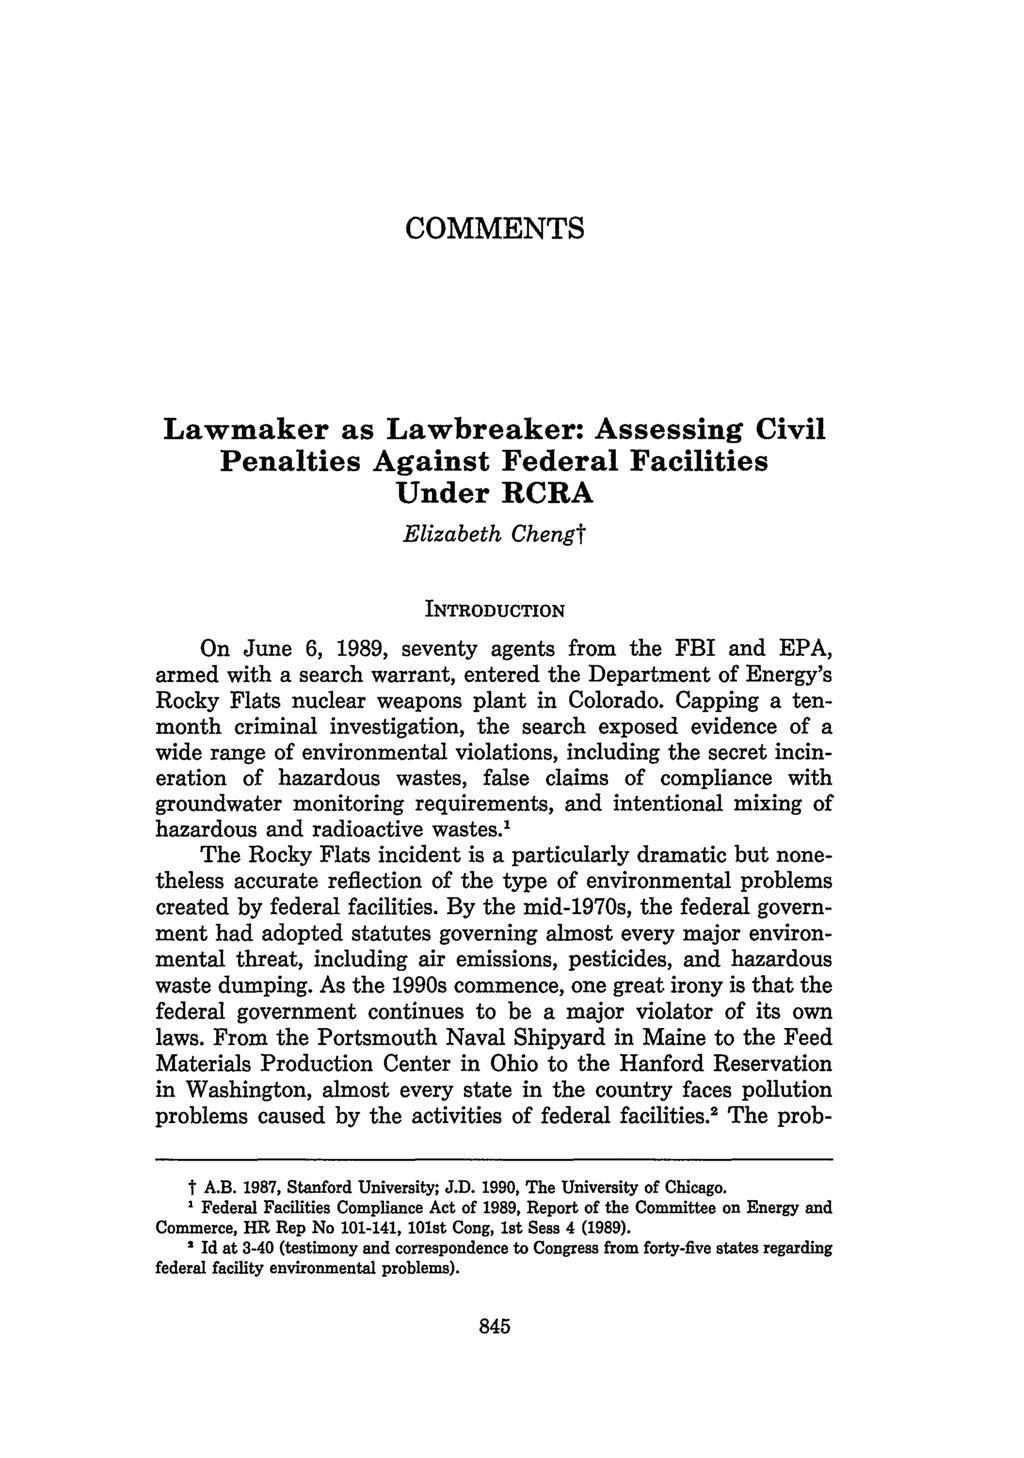 COMMENTS Lawmaker as Lawbreaker: Assessing Civil Penalties Against Federal Facilities Under RCRA Elizabeth Chengt INTRODUCTION On June 6, 1989, seventy agents from the FBI and EPA, armed with a